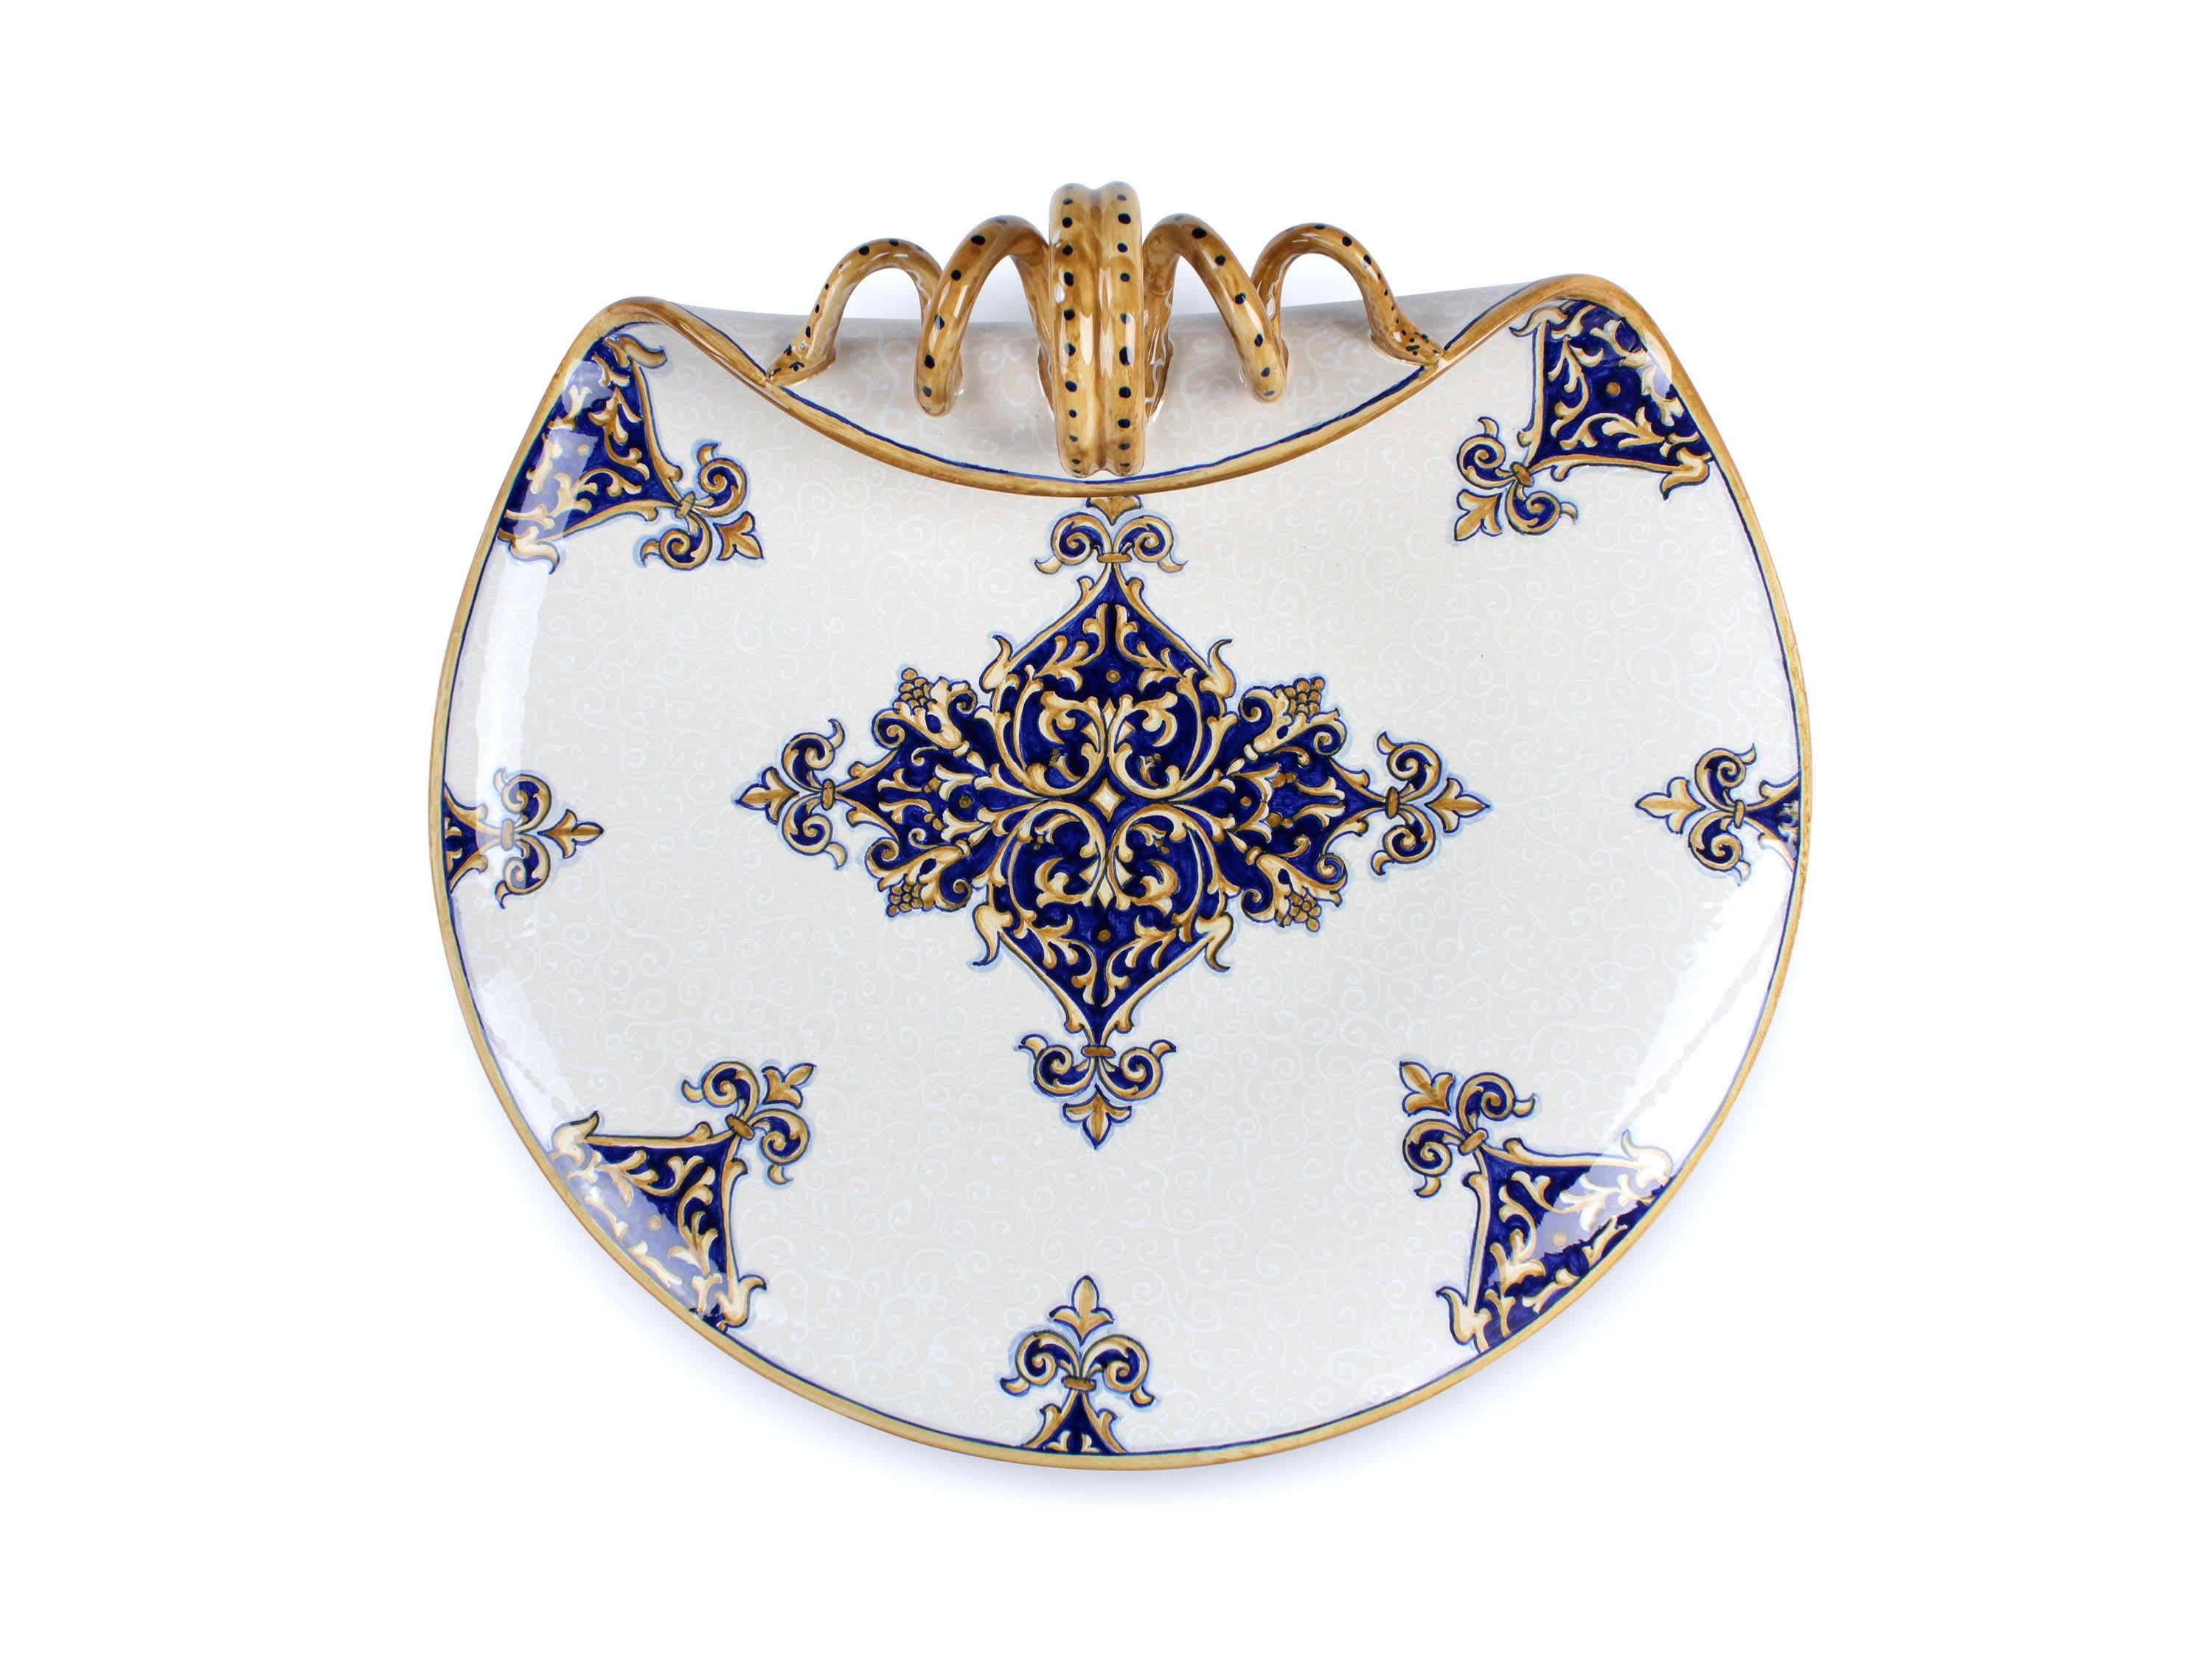 Modern Plate Centerpiece Bowl Tray Decorated Ornament Majolica Blue White Deruta Italy For Sale